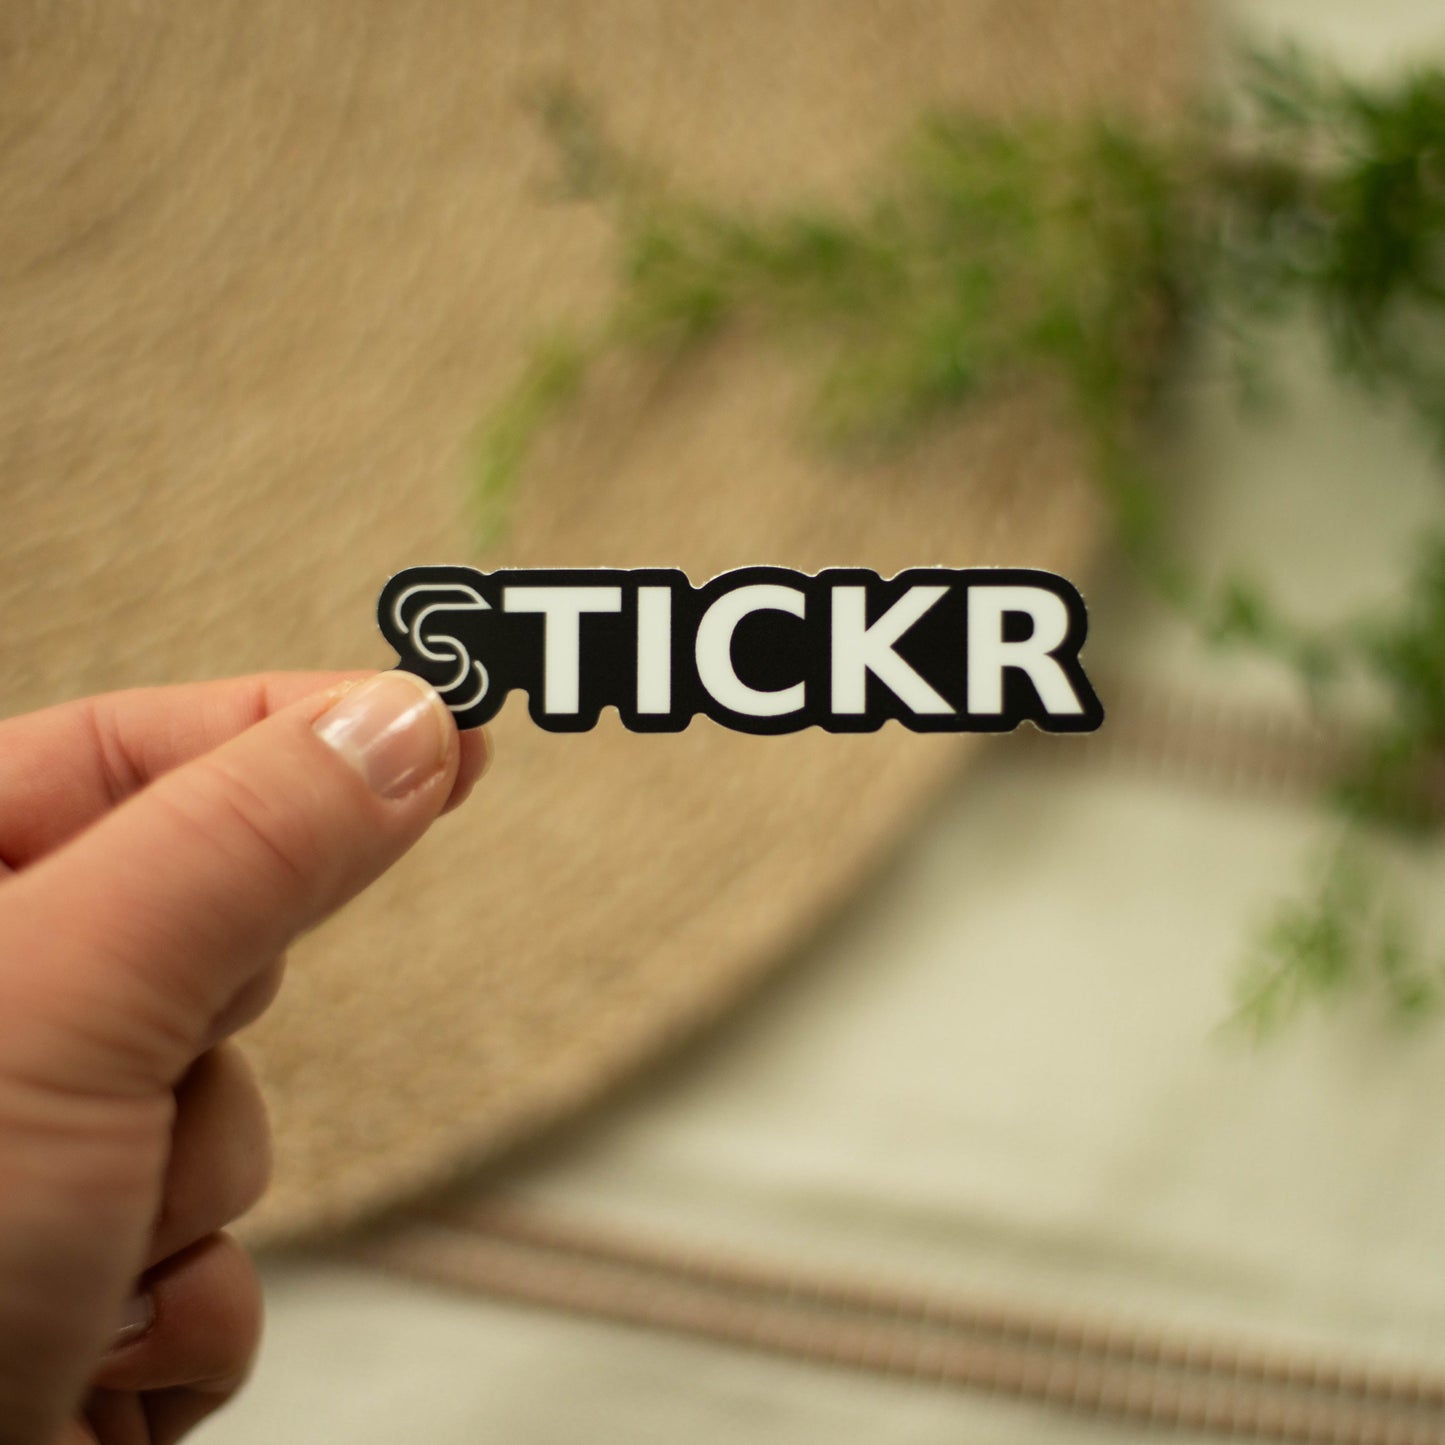 A hand holding a black and white vinyl sticker of the Stickr logo